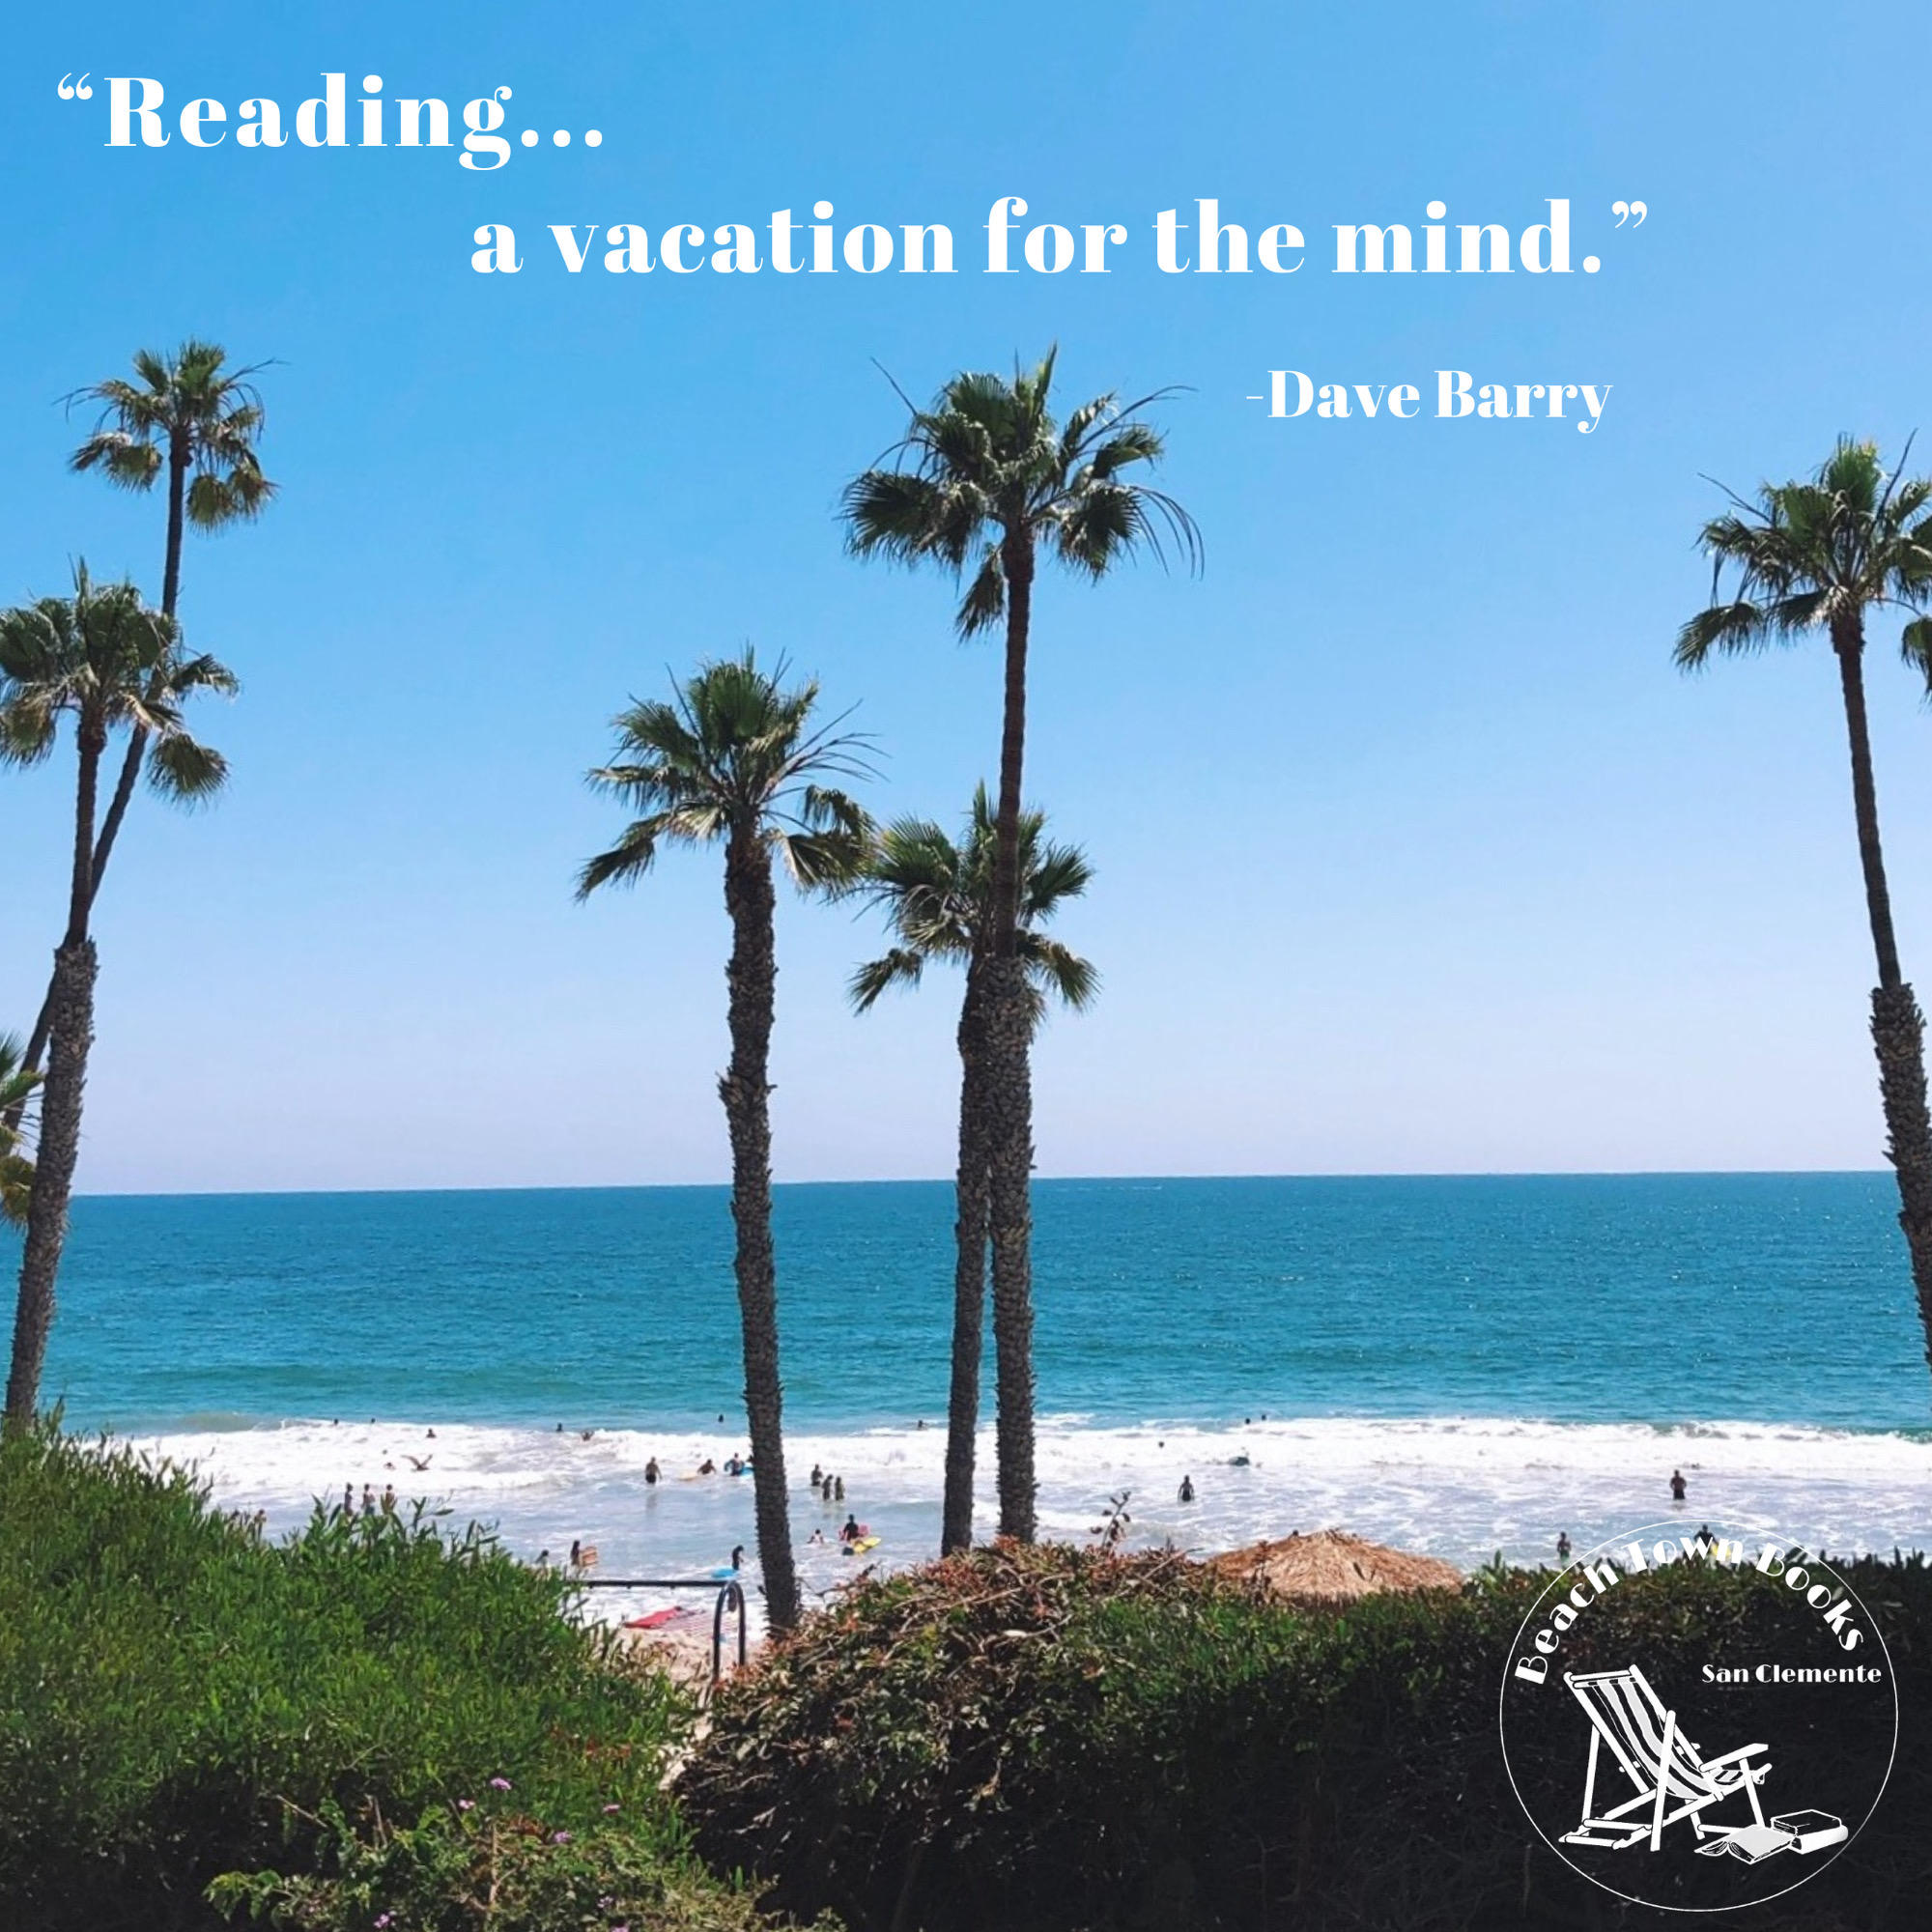 Reading....a vacation for the mind. -Dave Barry